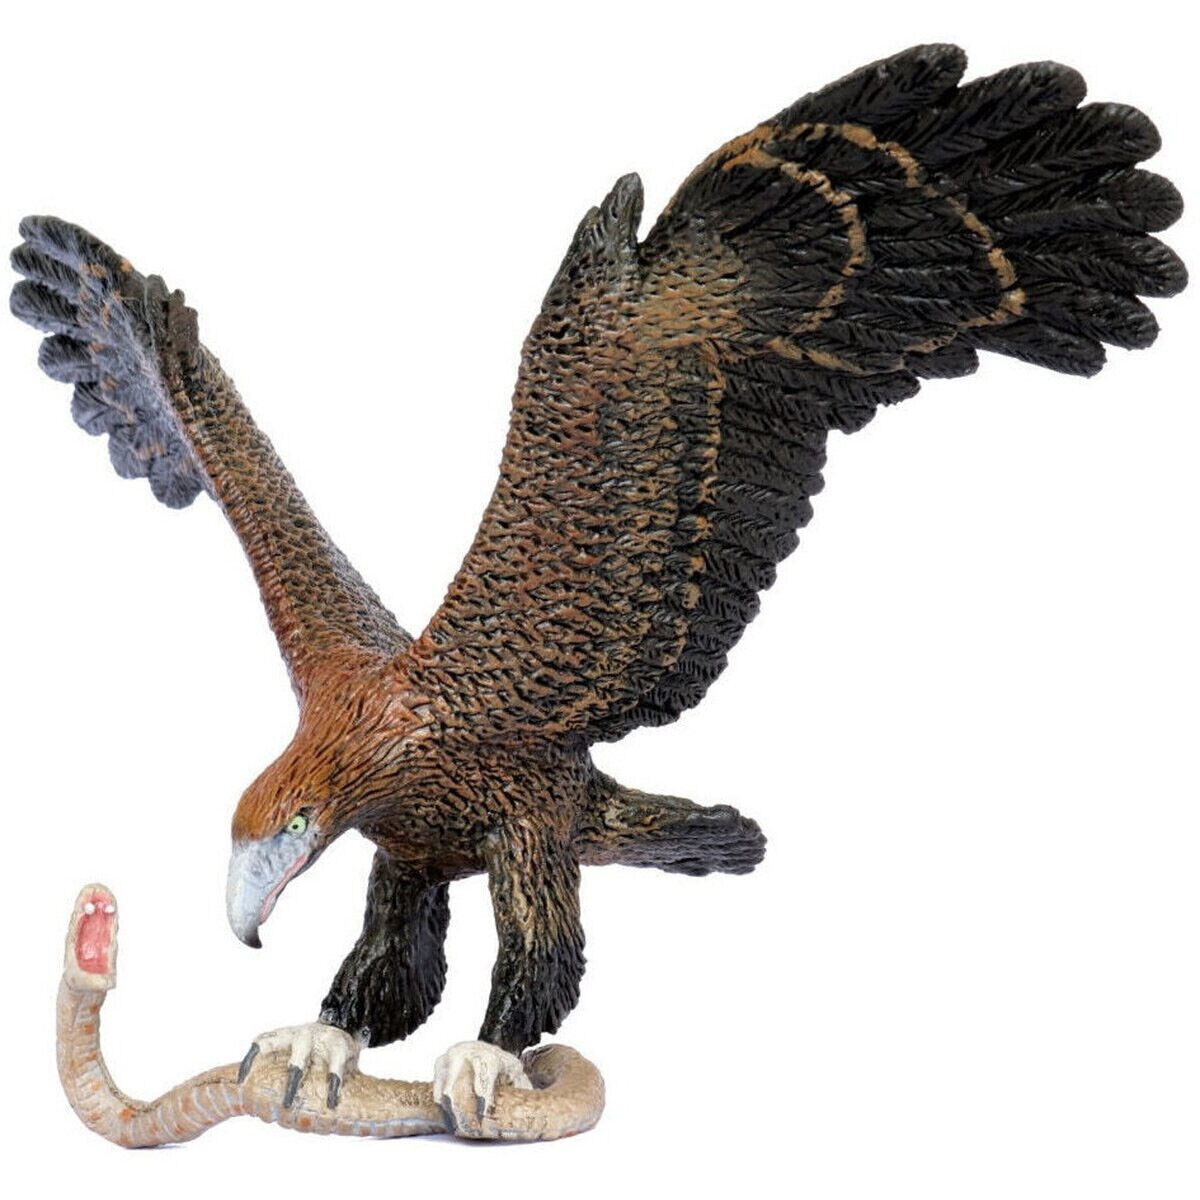 Southlands Replicas Wedge-tailed eagle with snake discontinued figurine NEW